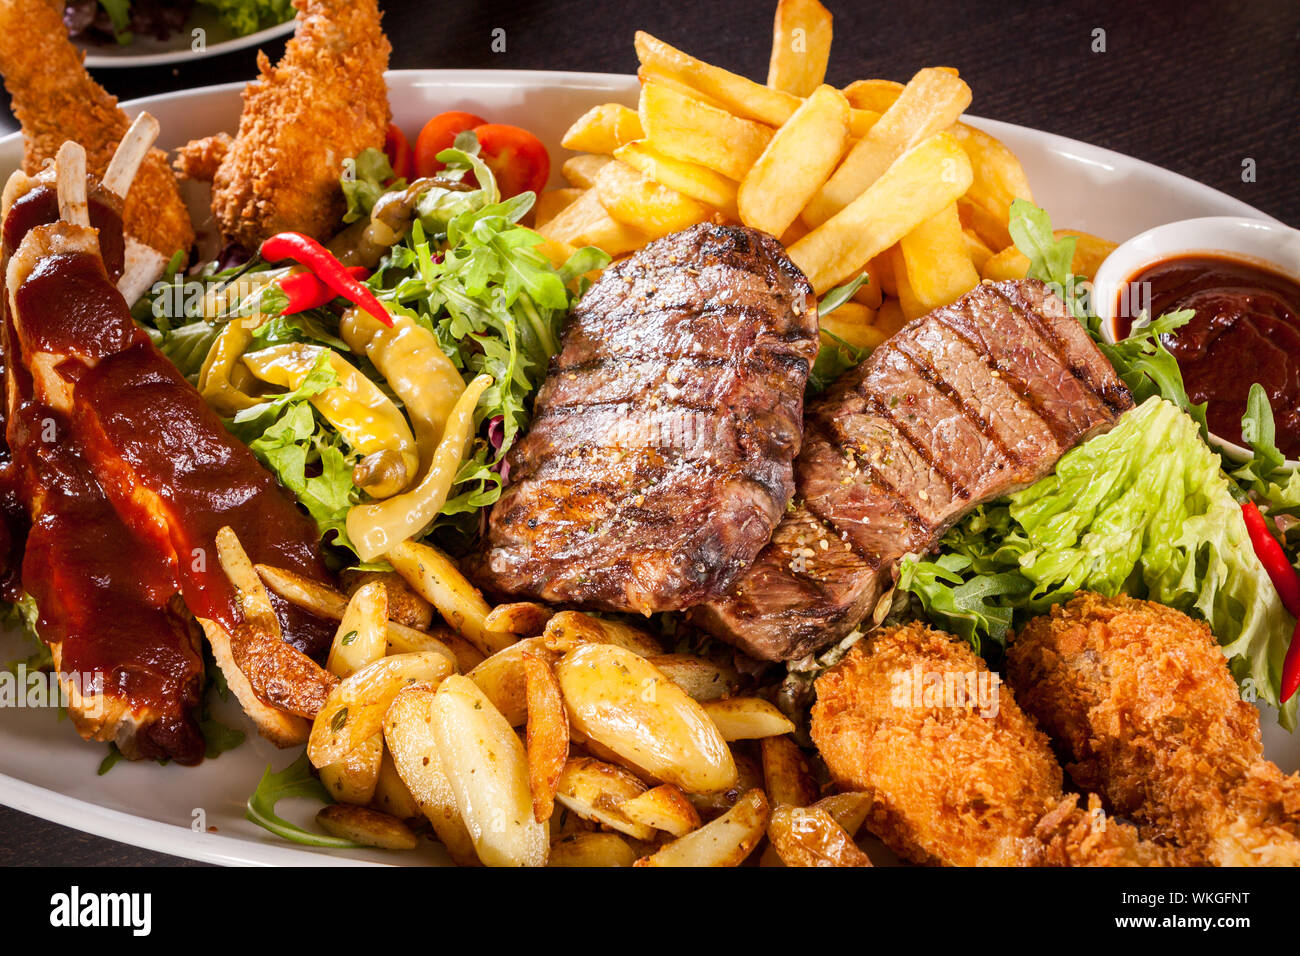 Wholesome platter of mixed meats including grilled steak, crispy crumbed chicken and beef on a bed of fresh leafy green mixed salad served with French Stock Photo